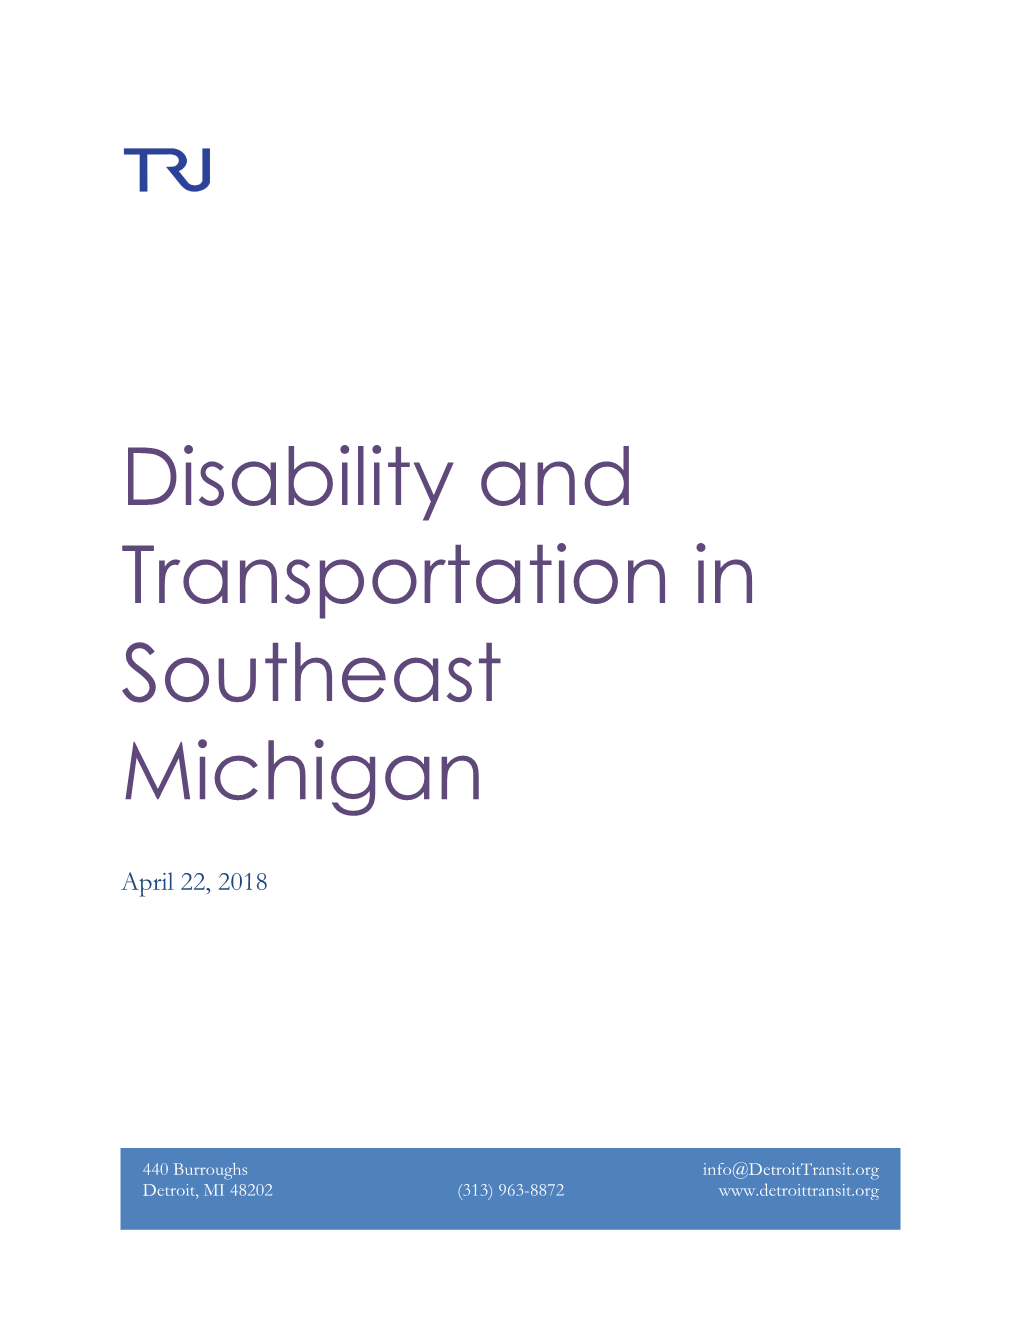 Disability and Transportation in Southeast Michigan